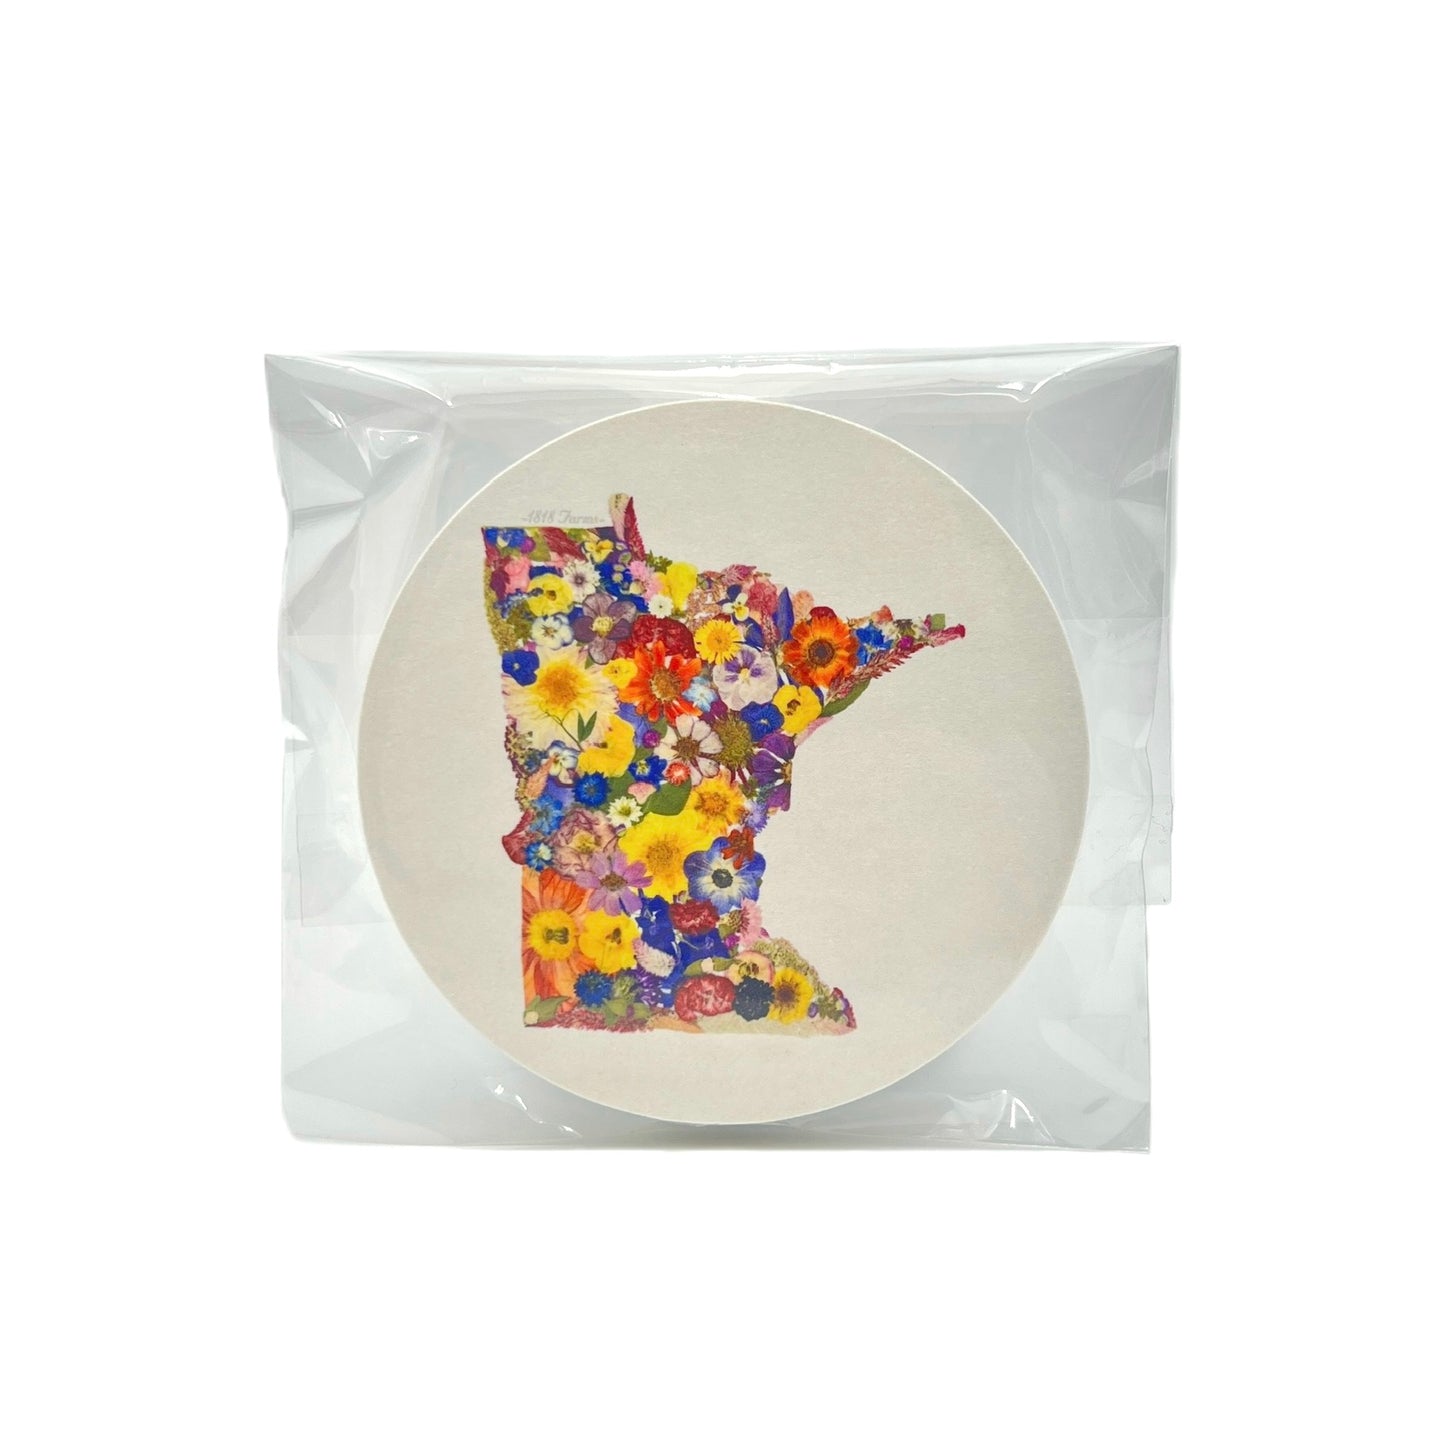 Minnesota Themed Coasters (Set of 6)  - "Where I Bloom" Collection Coaster 1818 Farms   